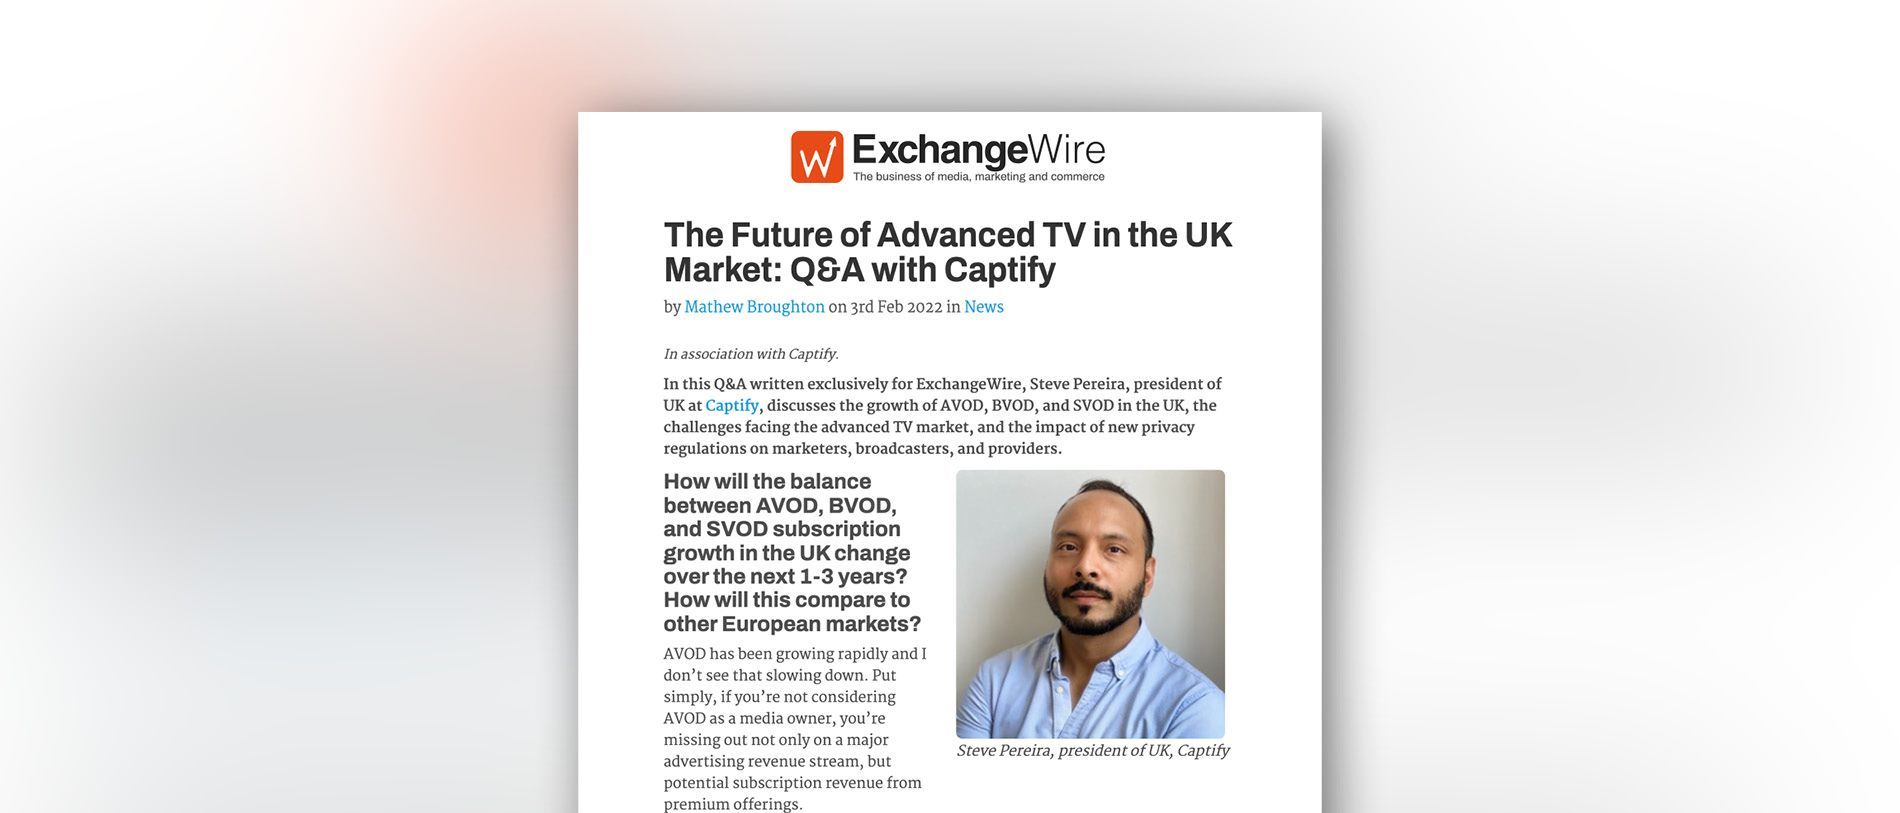 ExchangeWire: Captify’s Steve Pereira Discusses The Future of Advanced TV in the UK Market